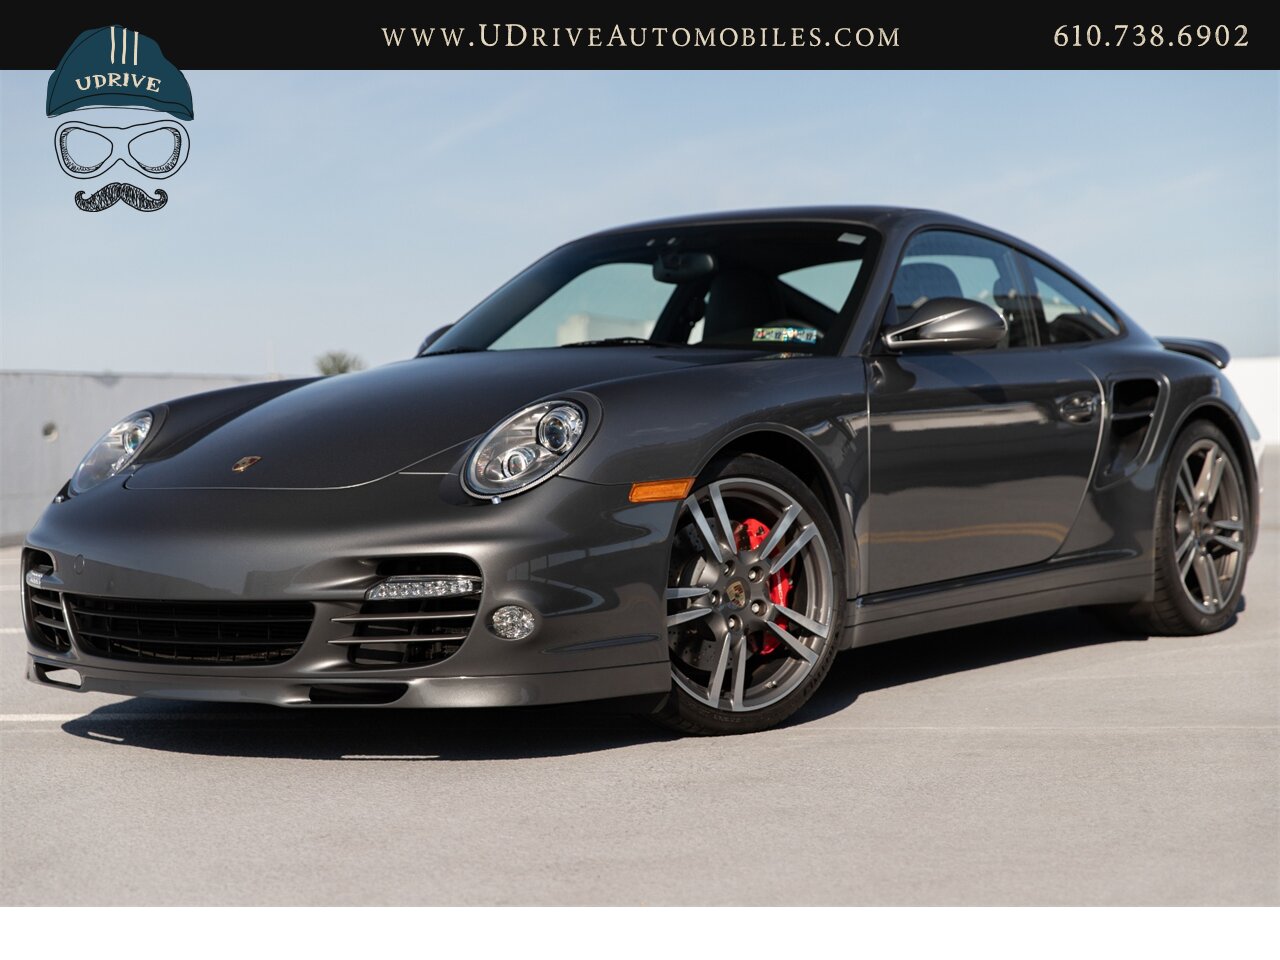 2012 Porsche 911 Turbo 6 Speed Manual 1 Owner 15k Miles PTV  Adaptive Sport Seats Sport Shifter 997.2 Extremely Rare - Photo 1 - West Chester, PA 19382